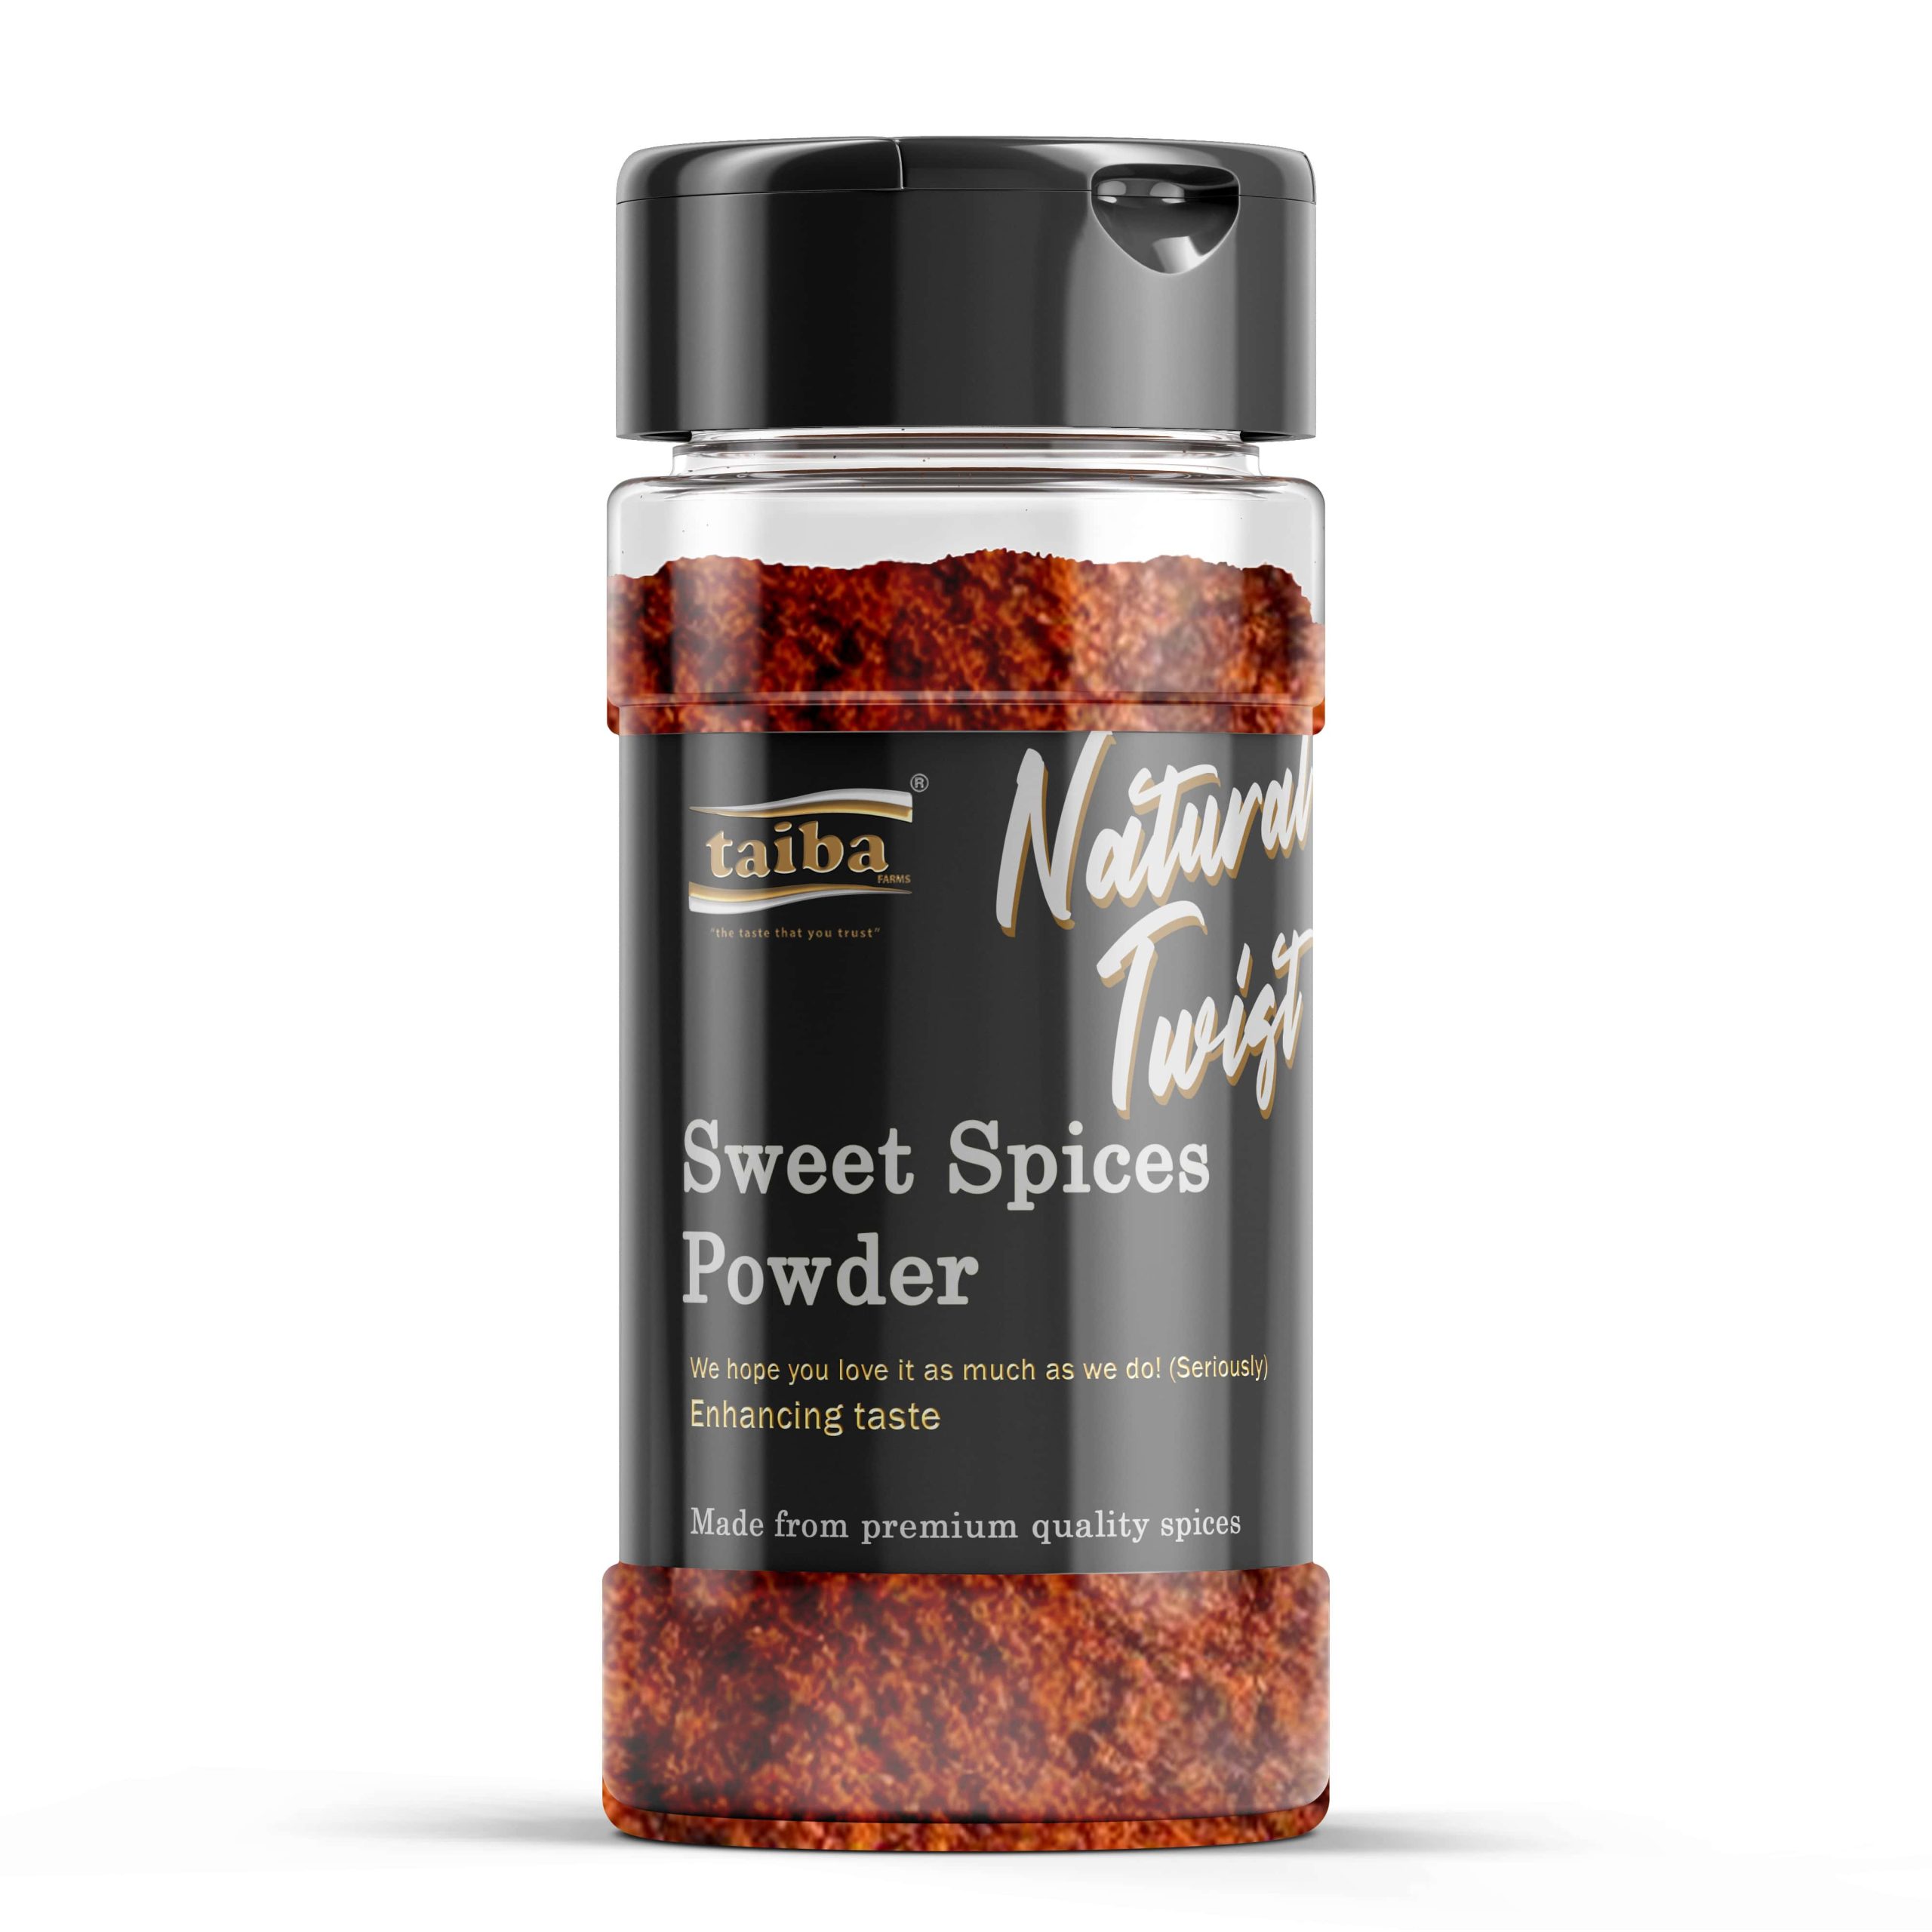 Sweet-Spices-online-grocery-hearps-and-spices-online-suppliers-in-India-Brazil-USA-Newyork-UAE-Saudi-Arabia